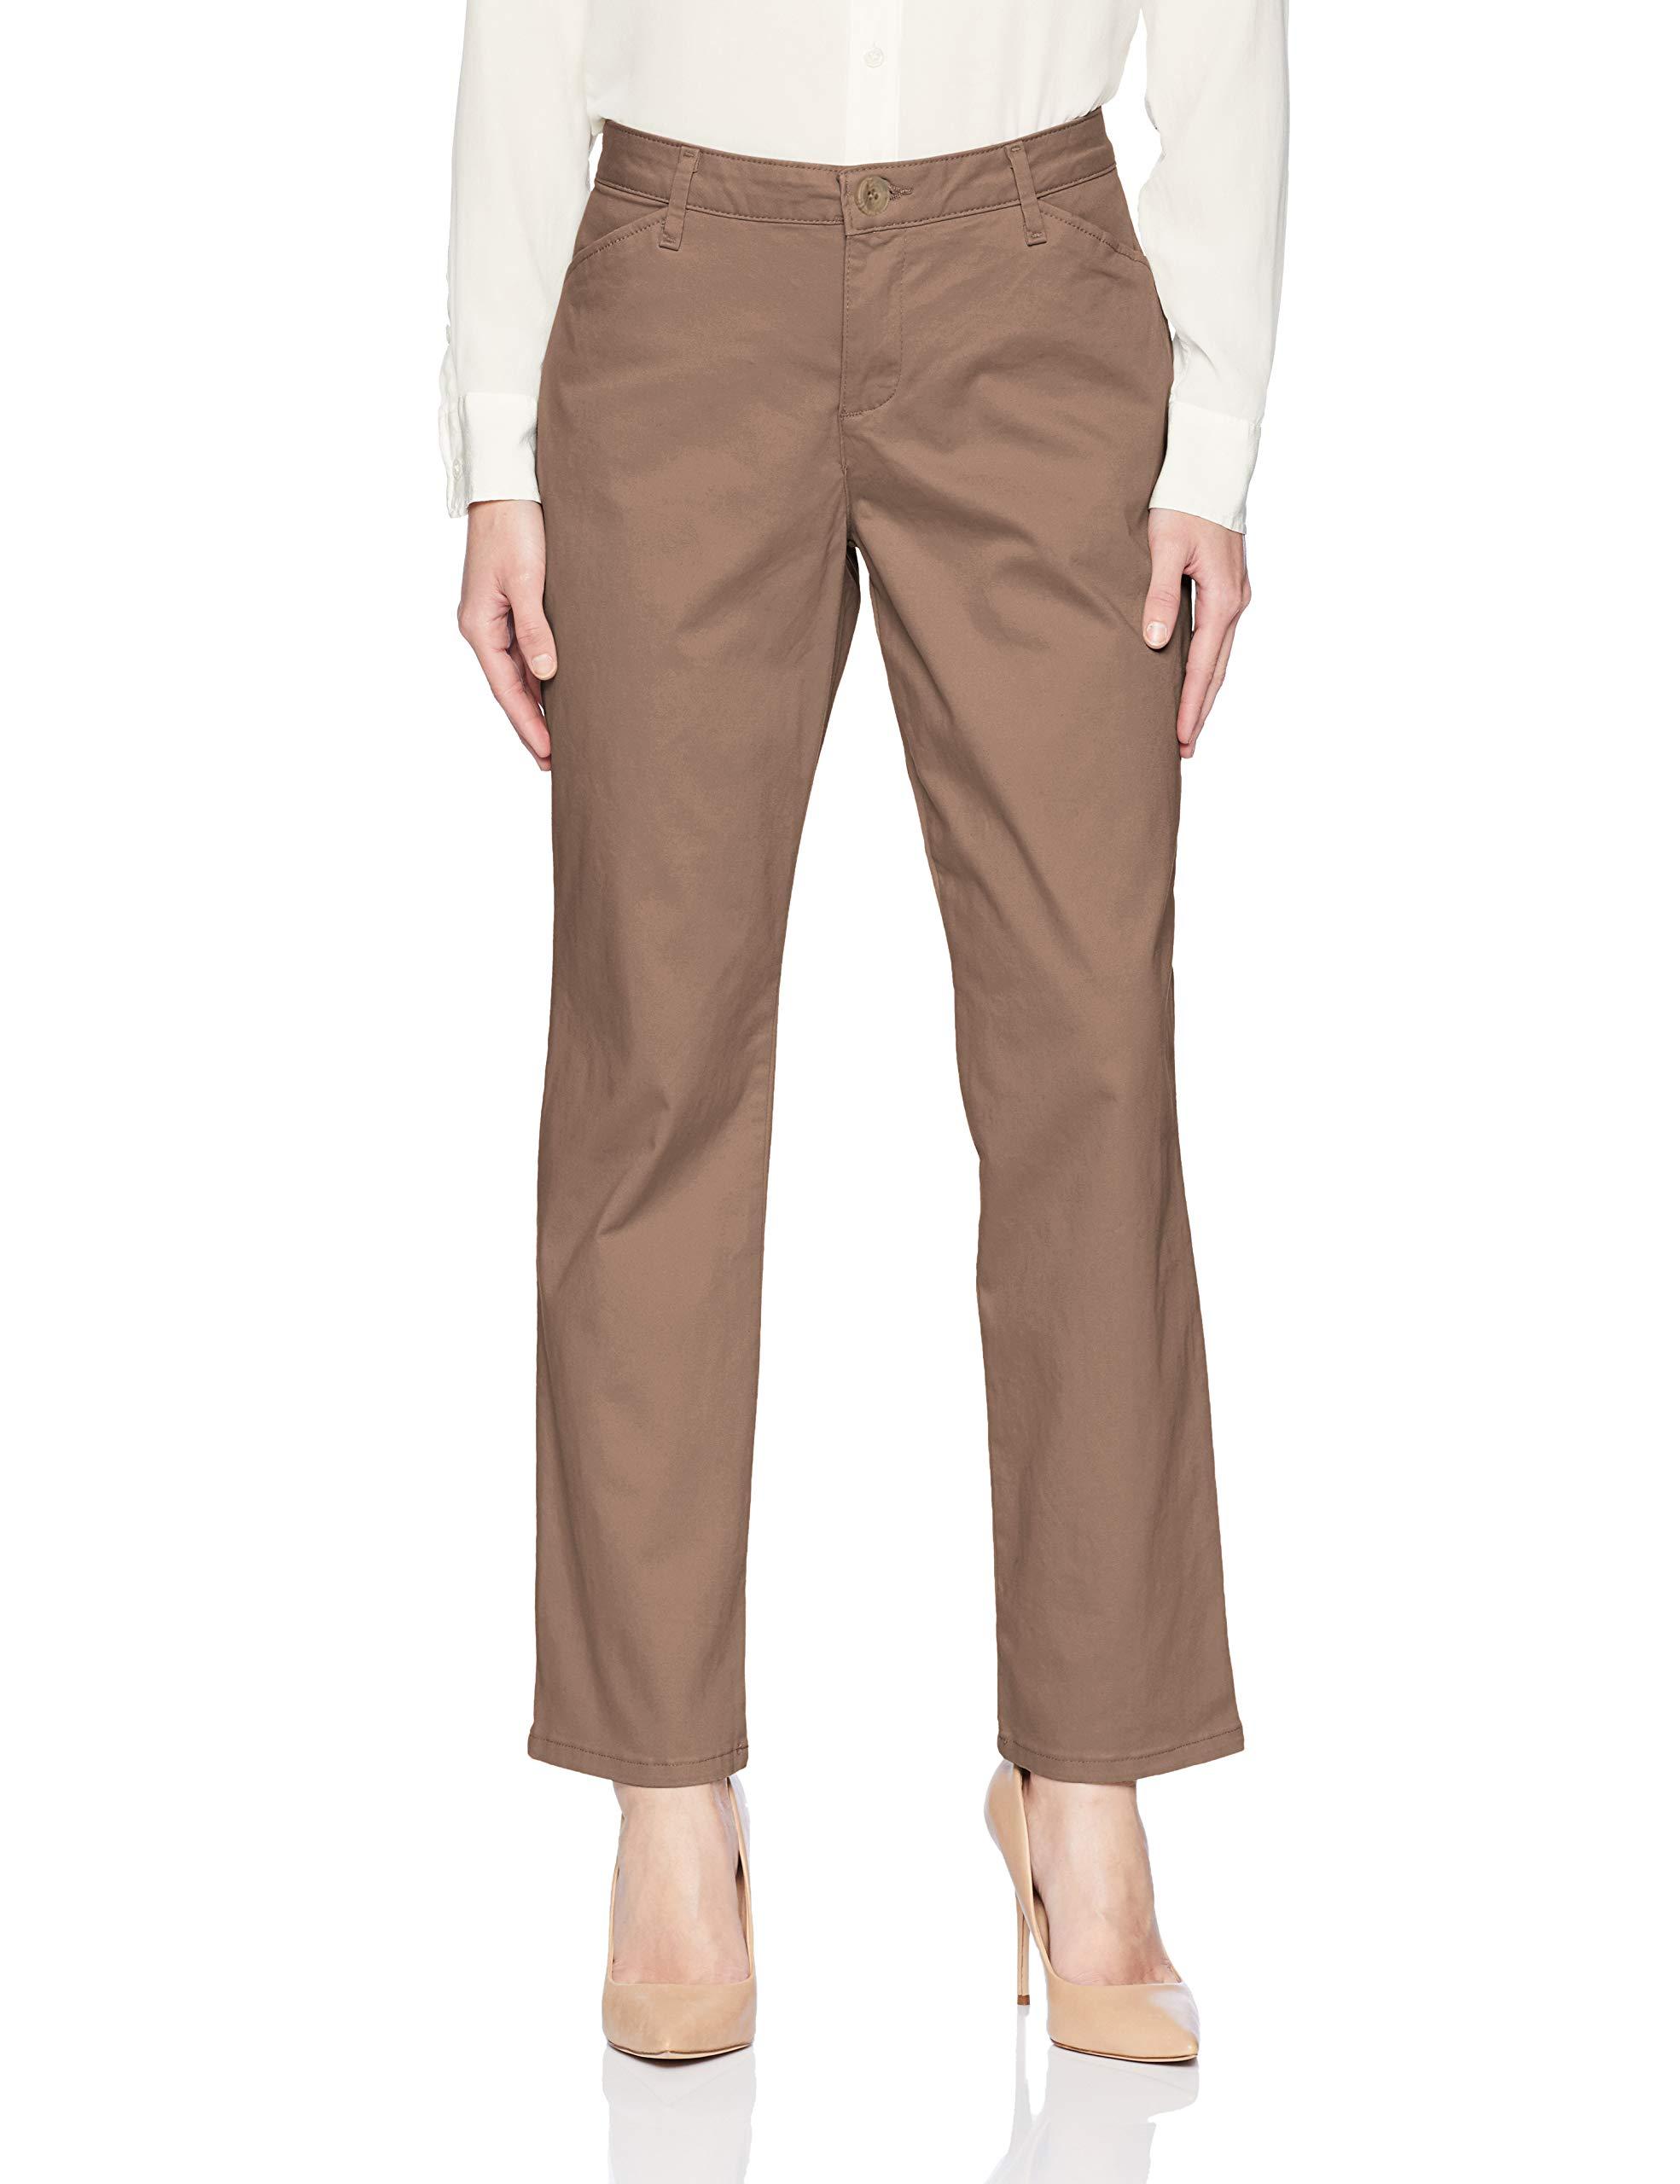 Lee Jeans 's Petite Relaxed Fit All Day Straight Leg Pant in Brown - Lyst